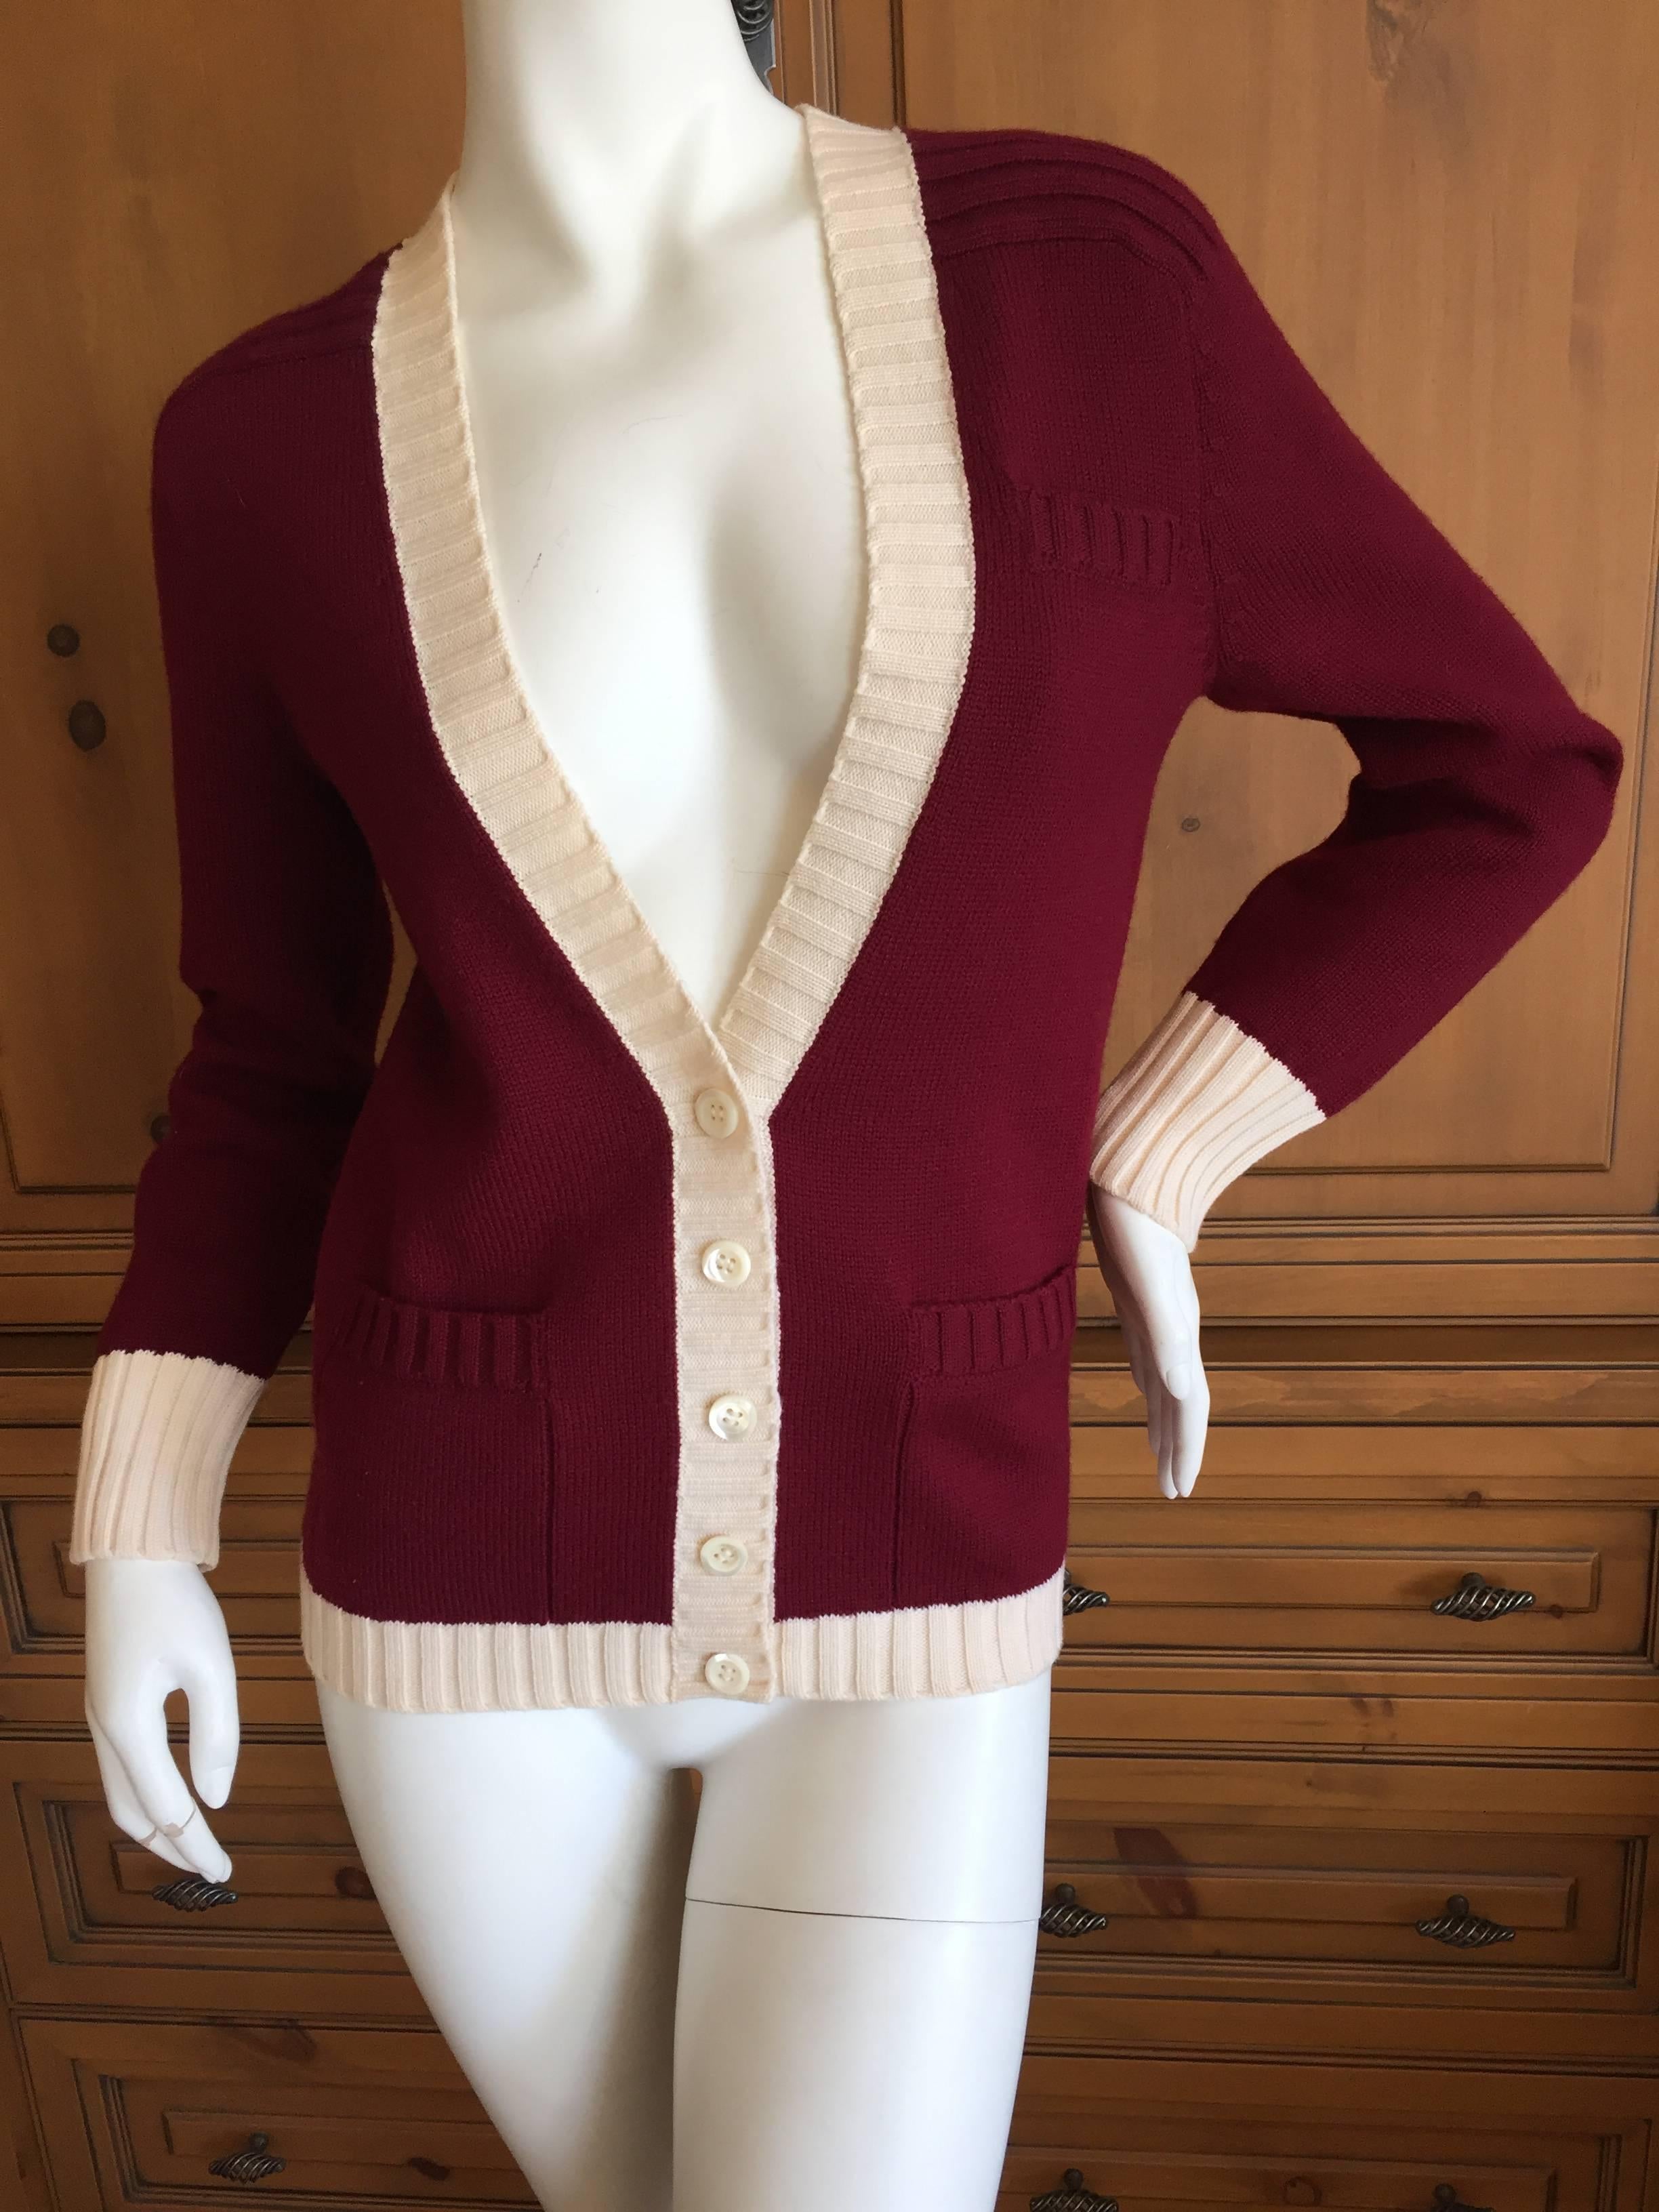 Burgundy wool cardigan with ivory ribbing from Yves Saint Laurent, pre Rive Gauche. The label is the older Cassandre Logo lable, before the creation of the pret a porter Rive Gauche line.
Marked size 1
Bust 40